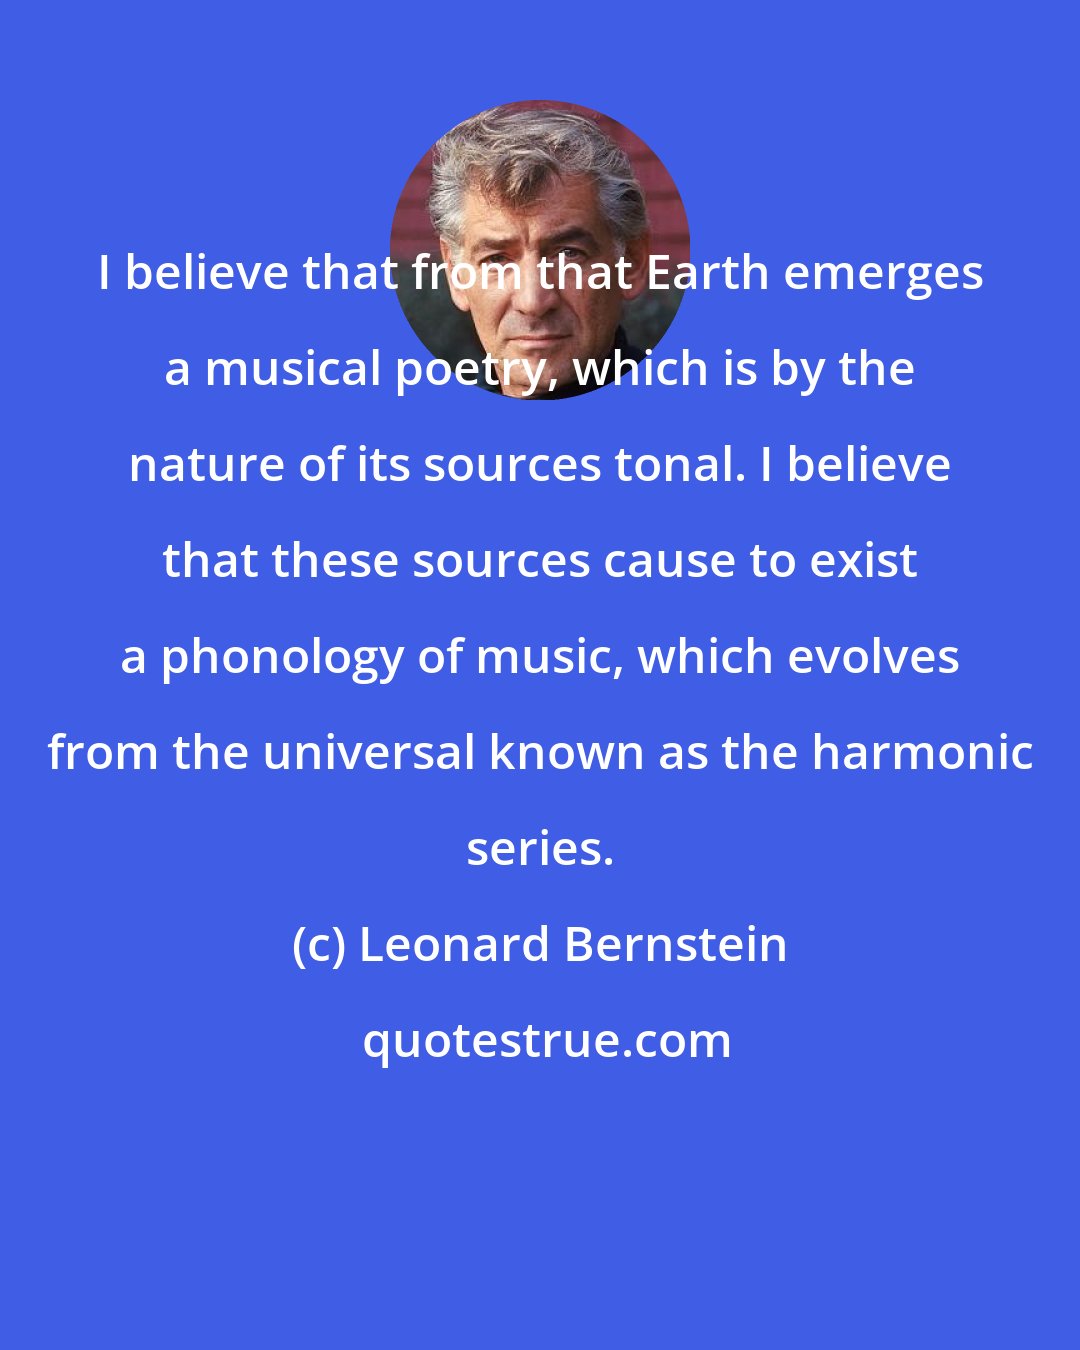 Leonard Bernstein: I believe that from that Earth emerges a musical poetry, which is by the nature of its sources tonal. I believe that these sources cause to exist a phonology of music, which evolves from the universal known as the harmonic series.